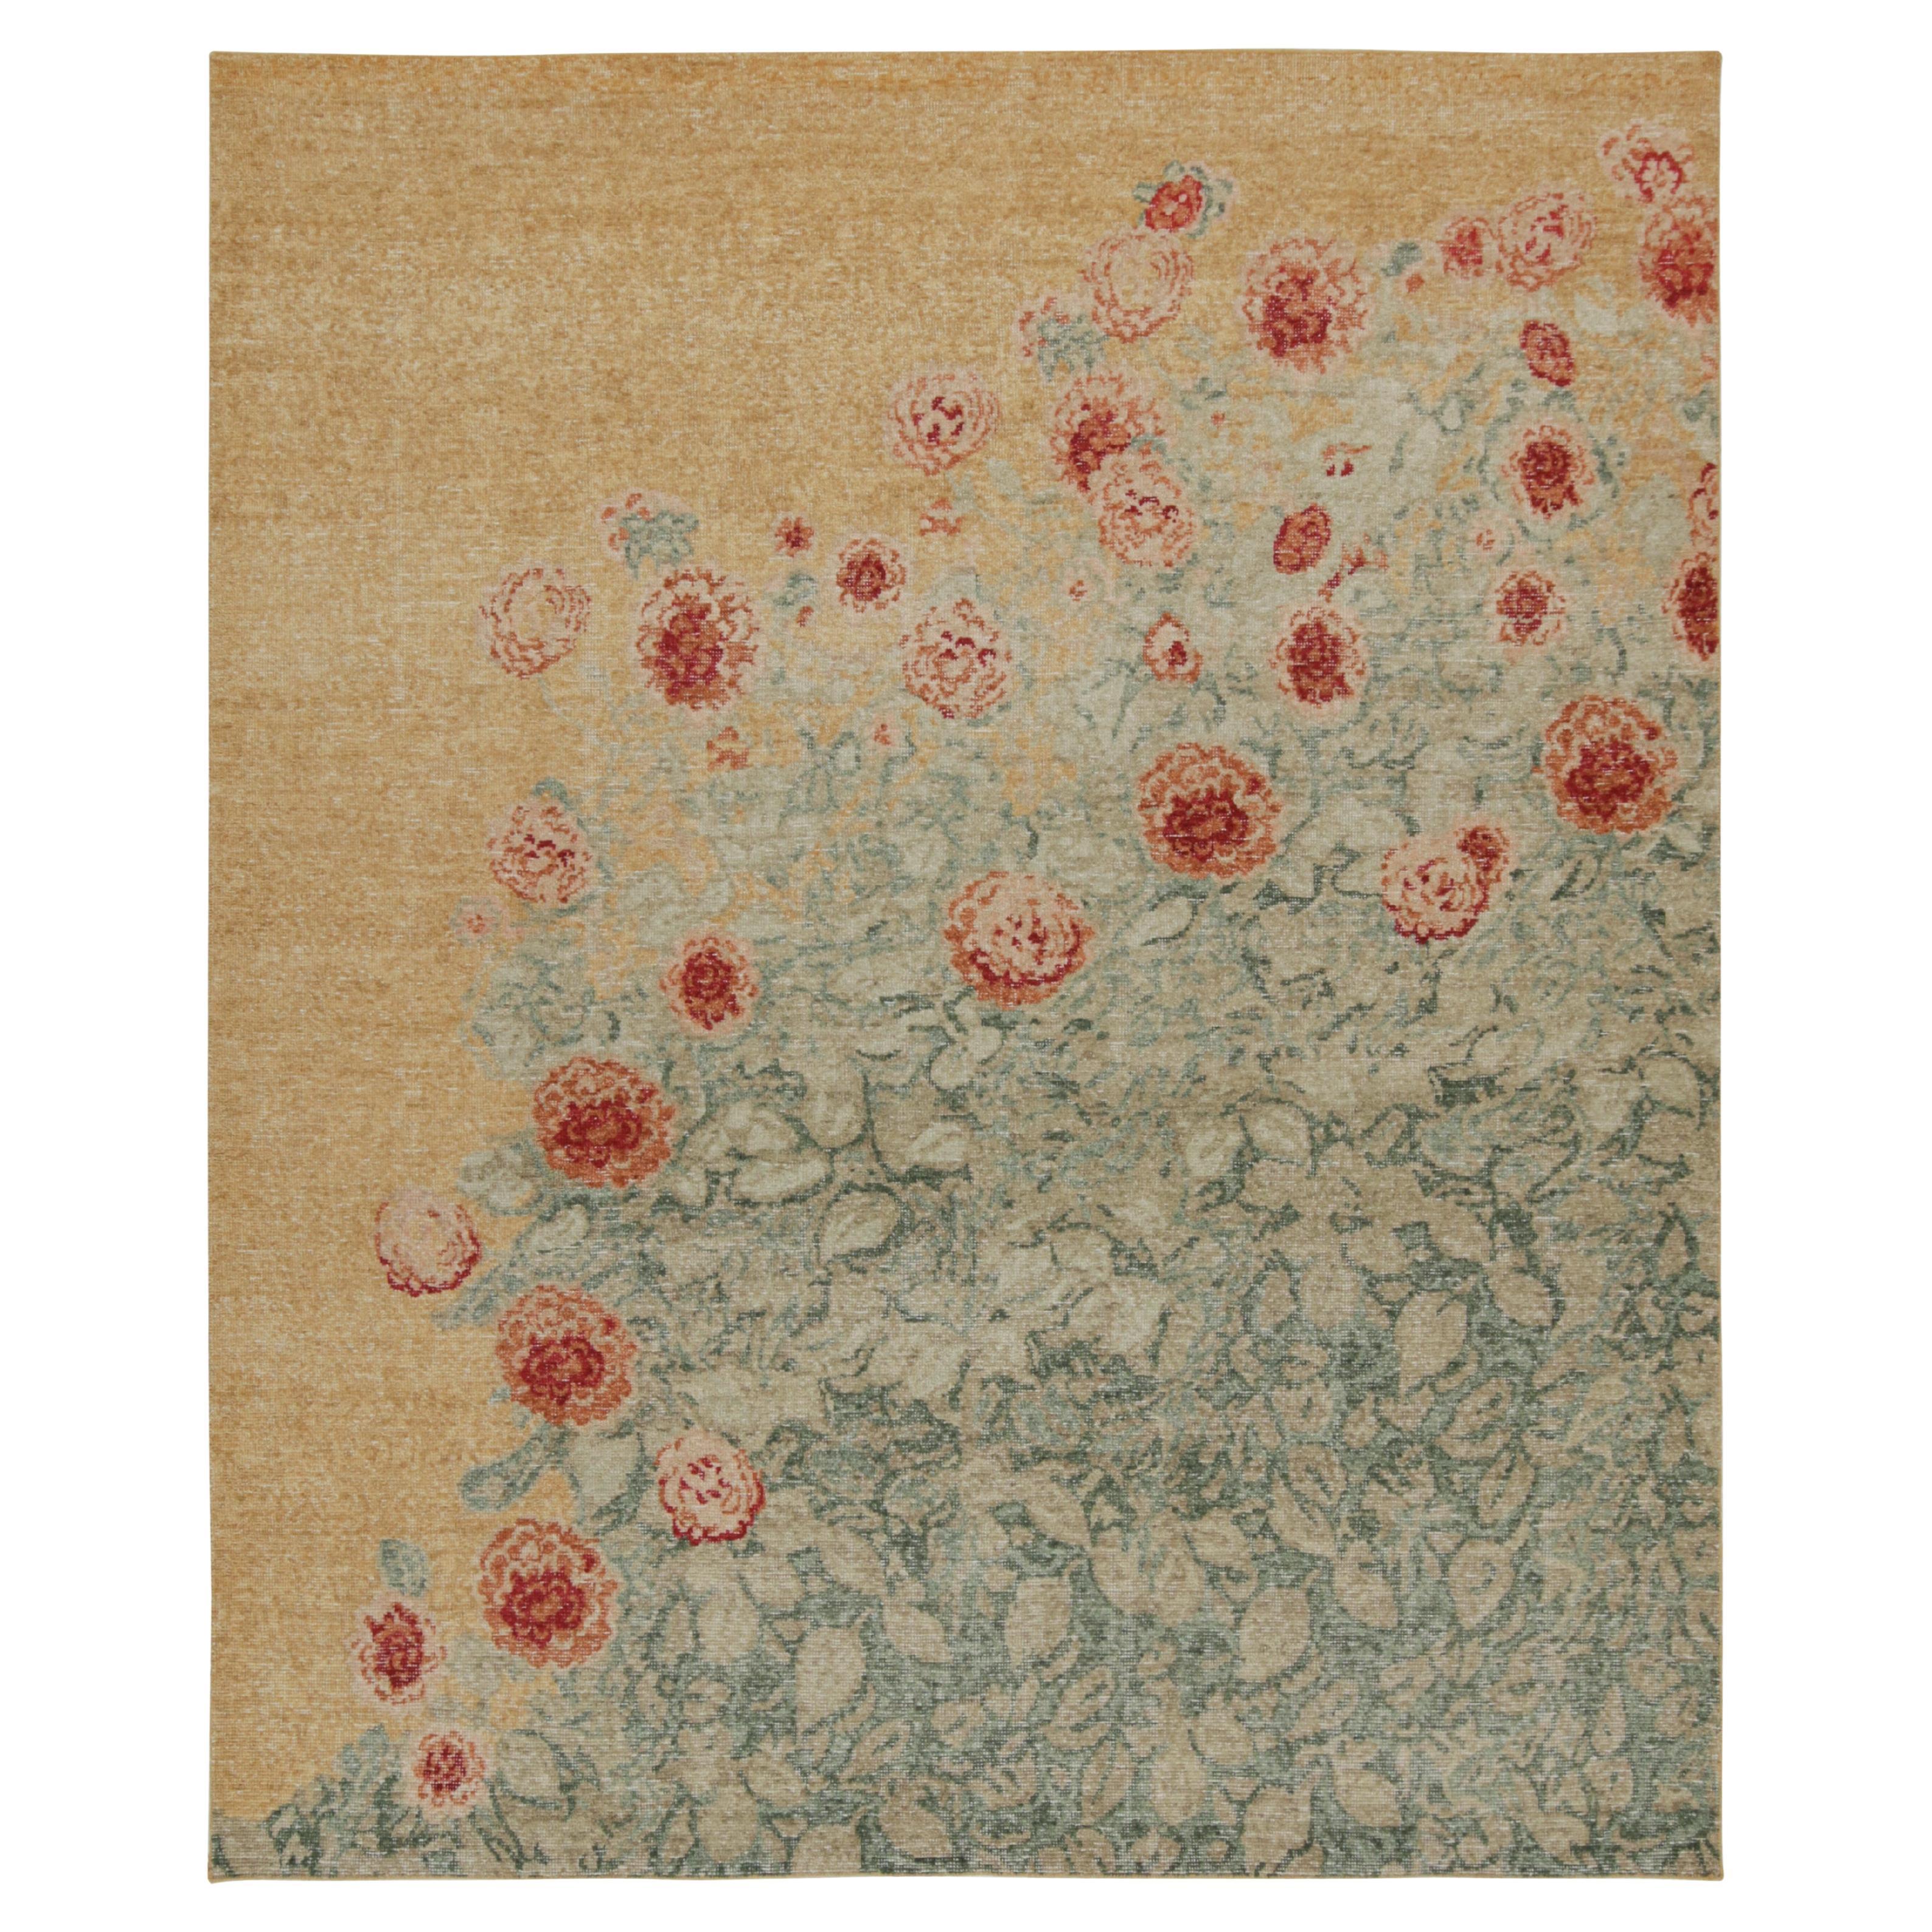 Rug & Kilim’s Distressed style Transitional rug in Polychromatic Floral Patterns